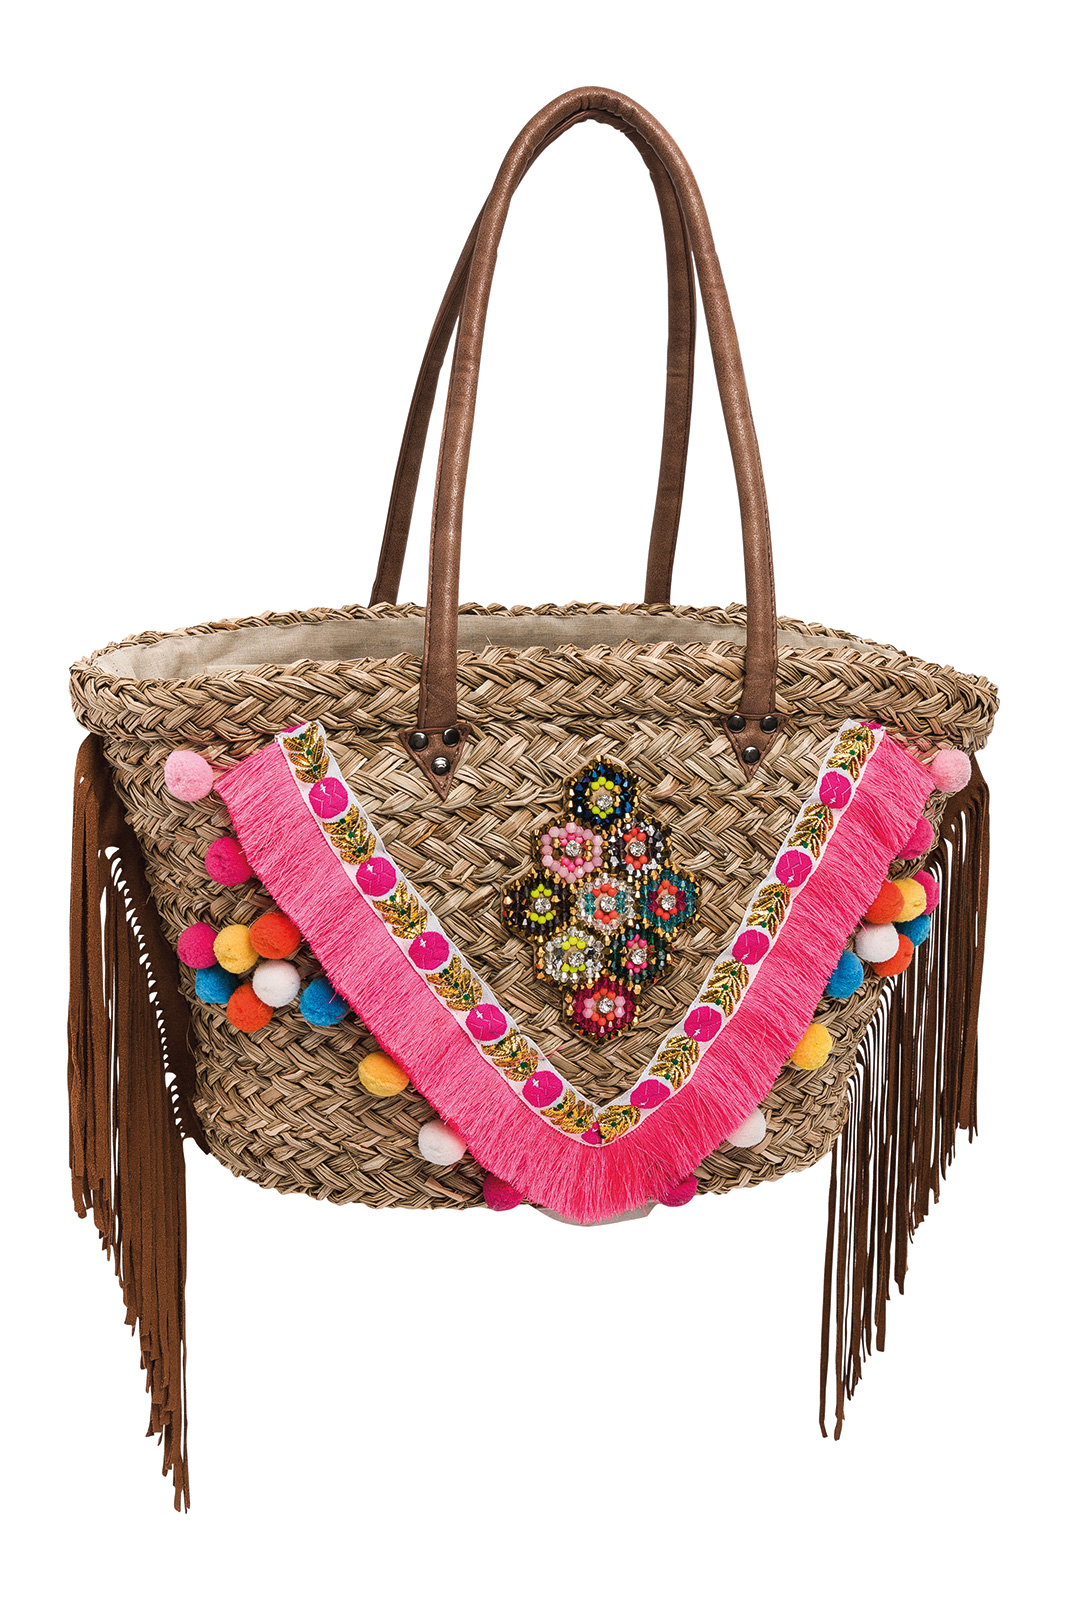 Basket Decorated With Beads, Fringing And A Pink Stripe - Iris Pink